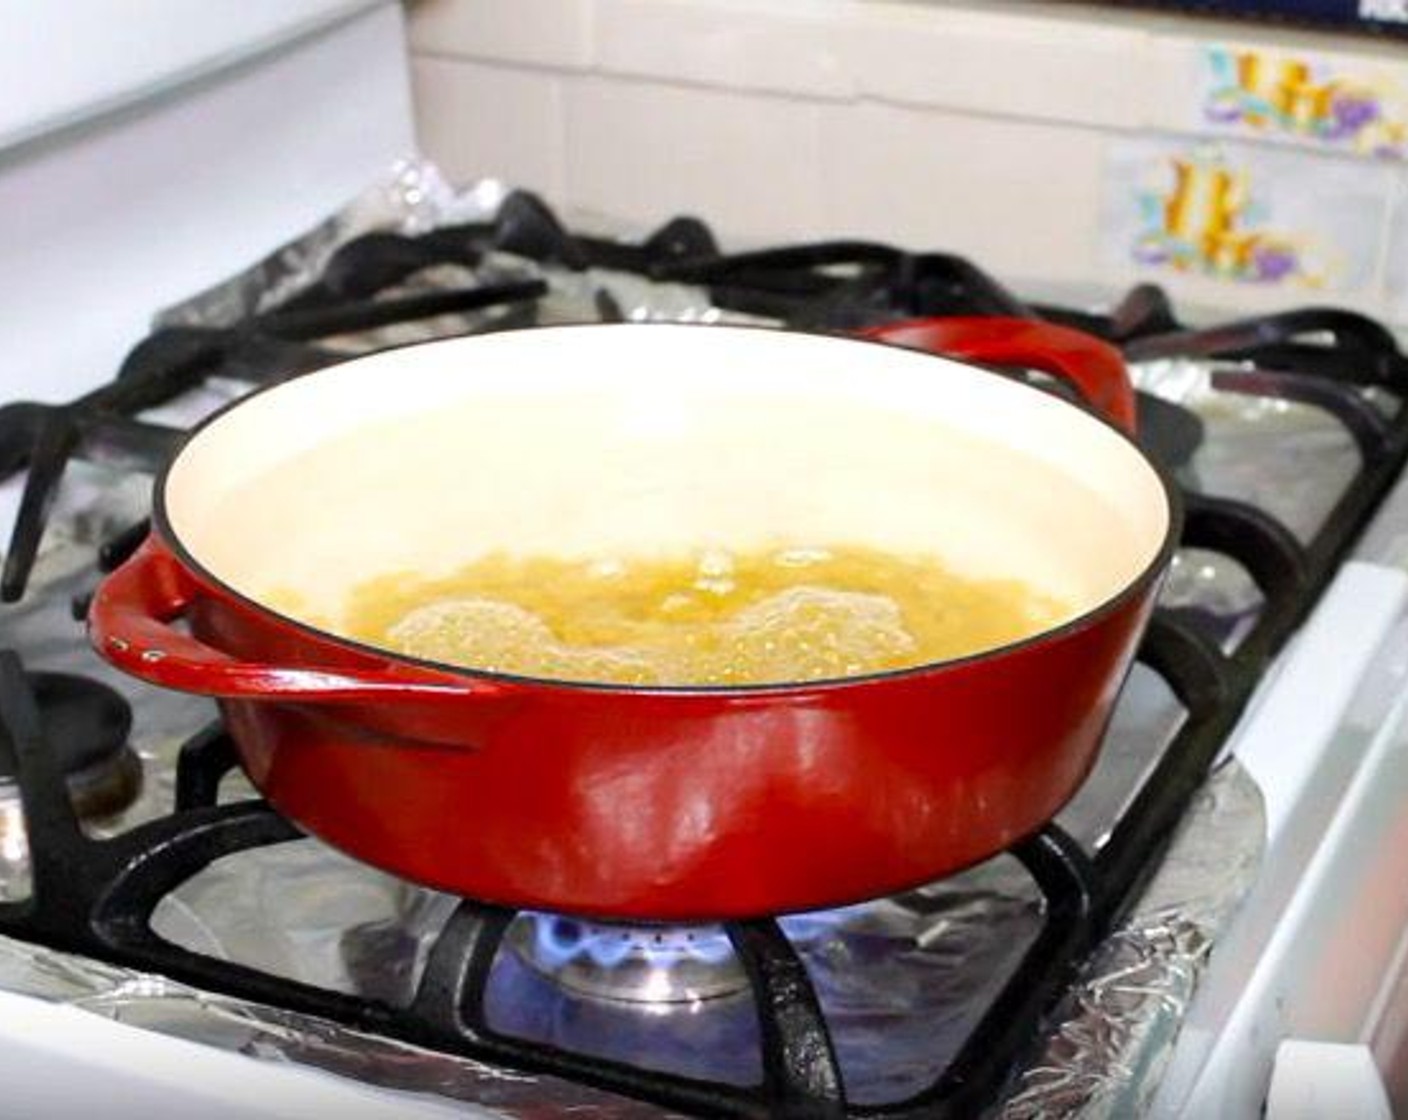 step 1 Bring a pot of salted water to a boil. Cook Elbow Macaroni (2 cups) al dente according to package instructions. Drain and set aside.